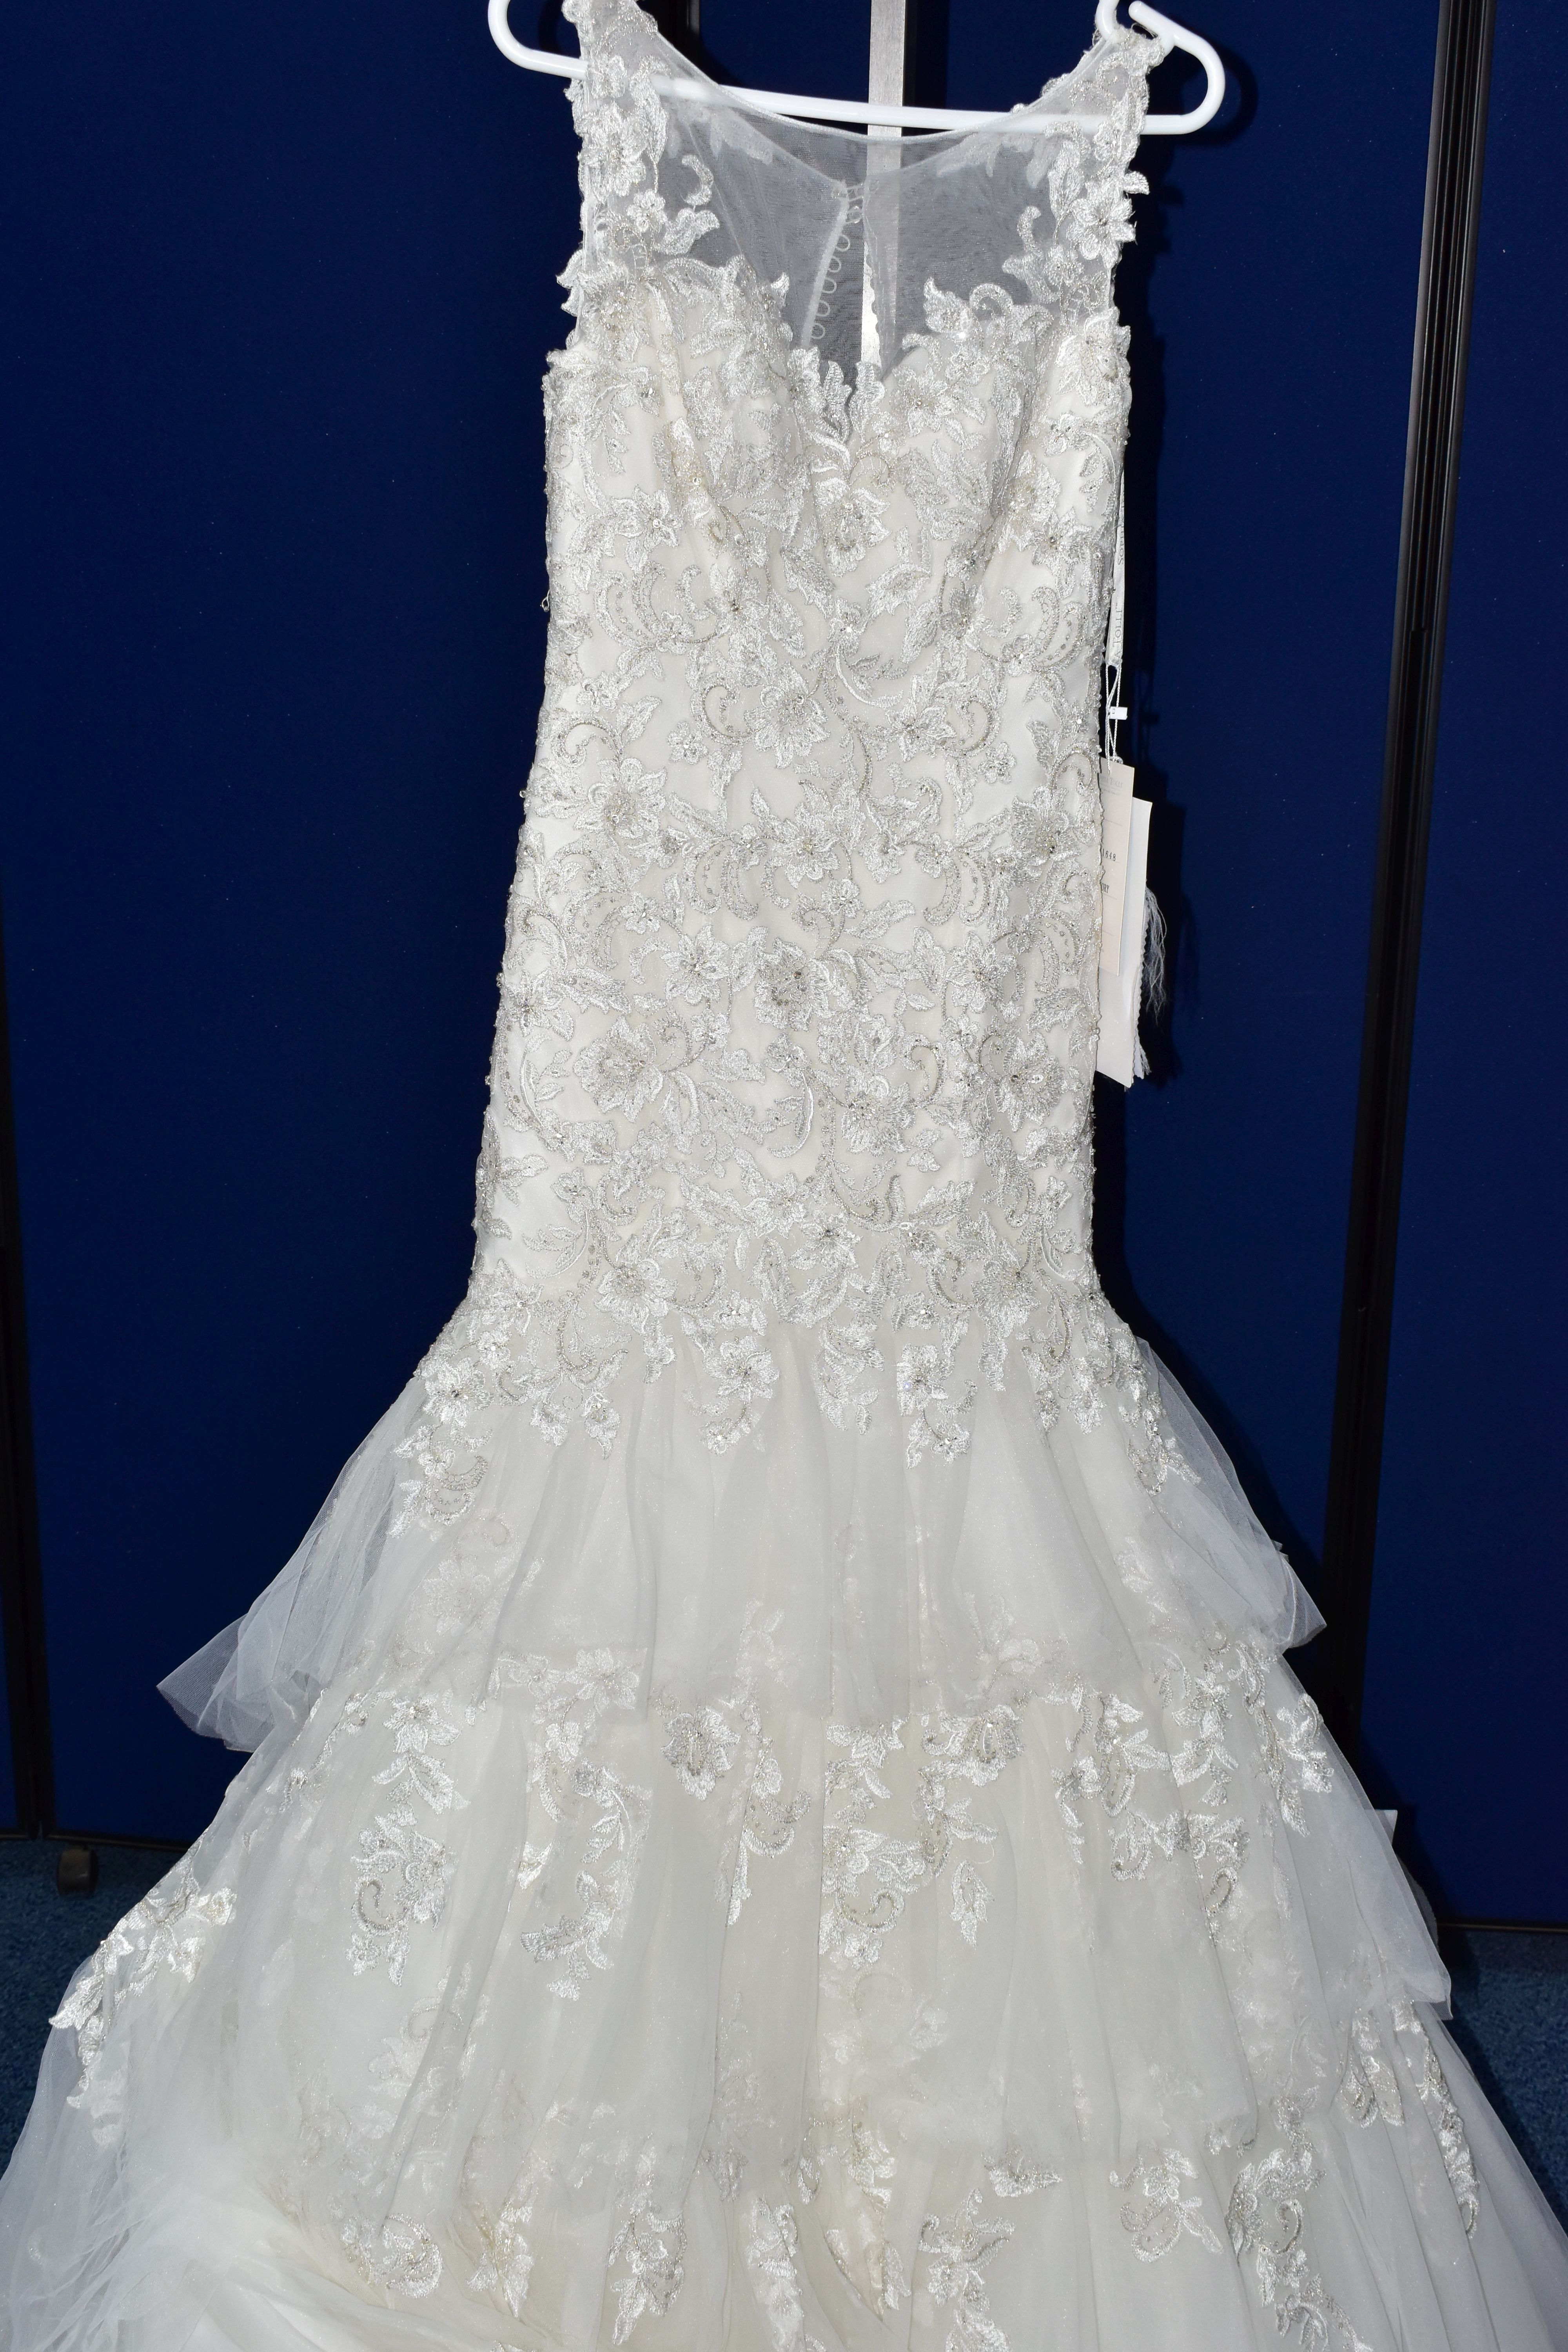 WEDDING DRESS, 'Sophia Tolli', ivory, size 6, beaded appliques, button detail along back, dropped - Image 2 of 16